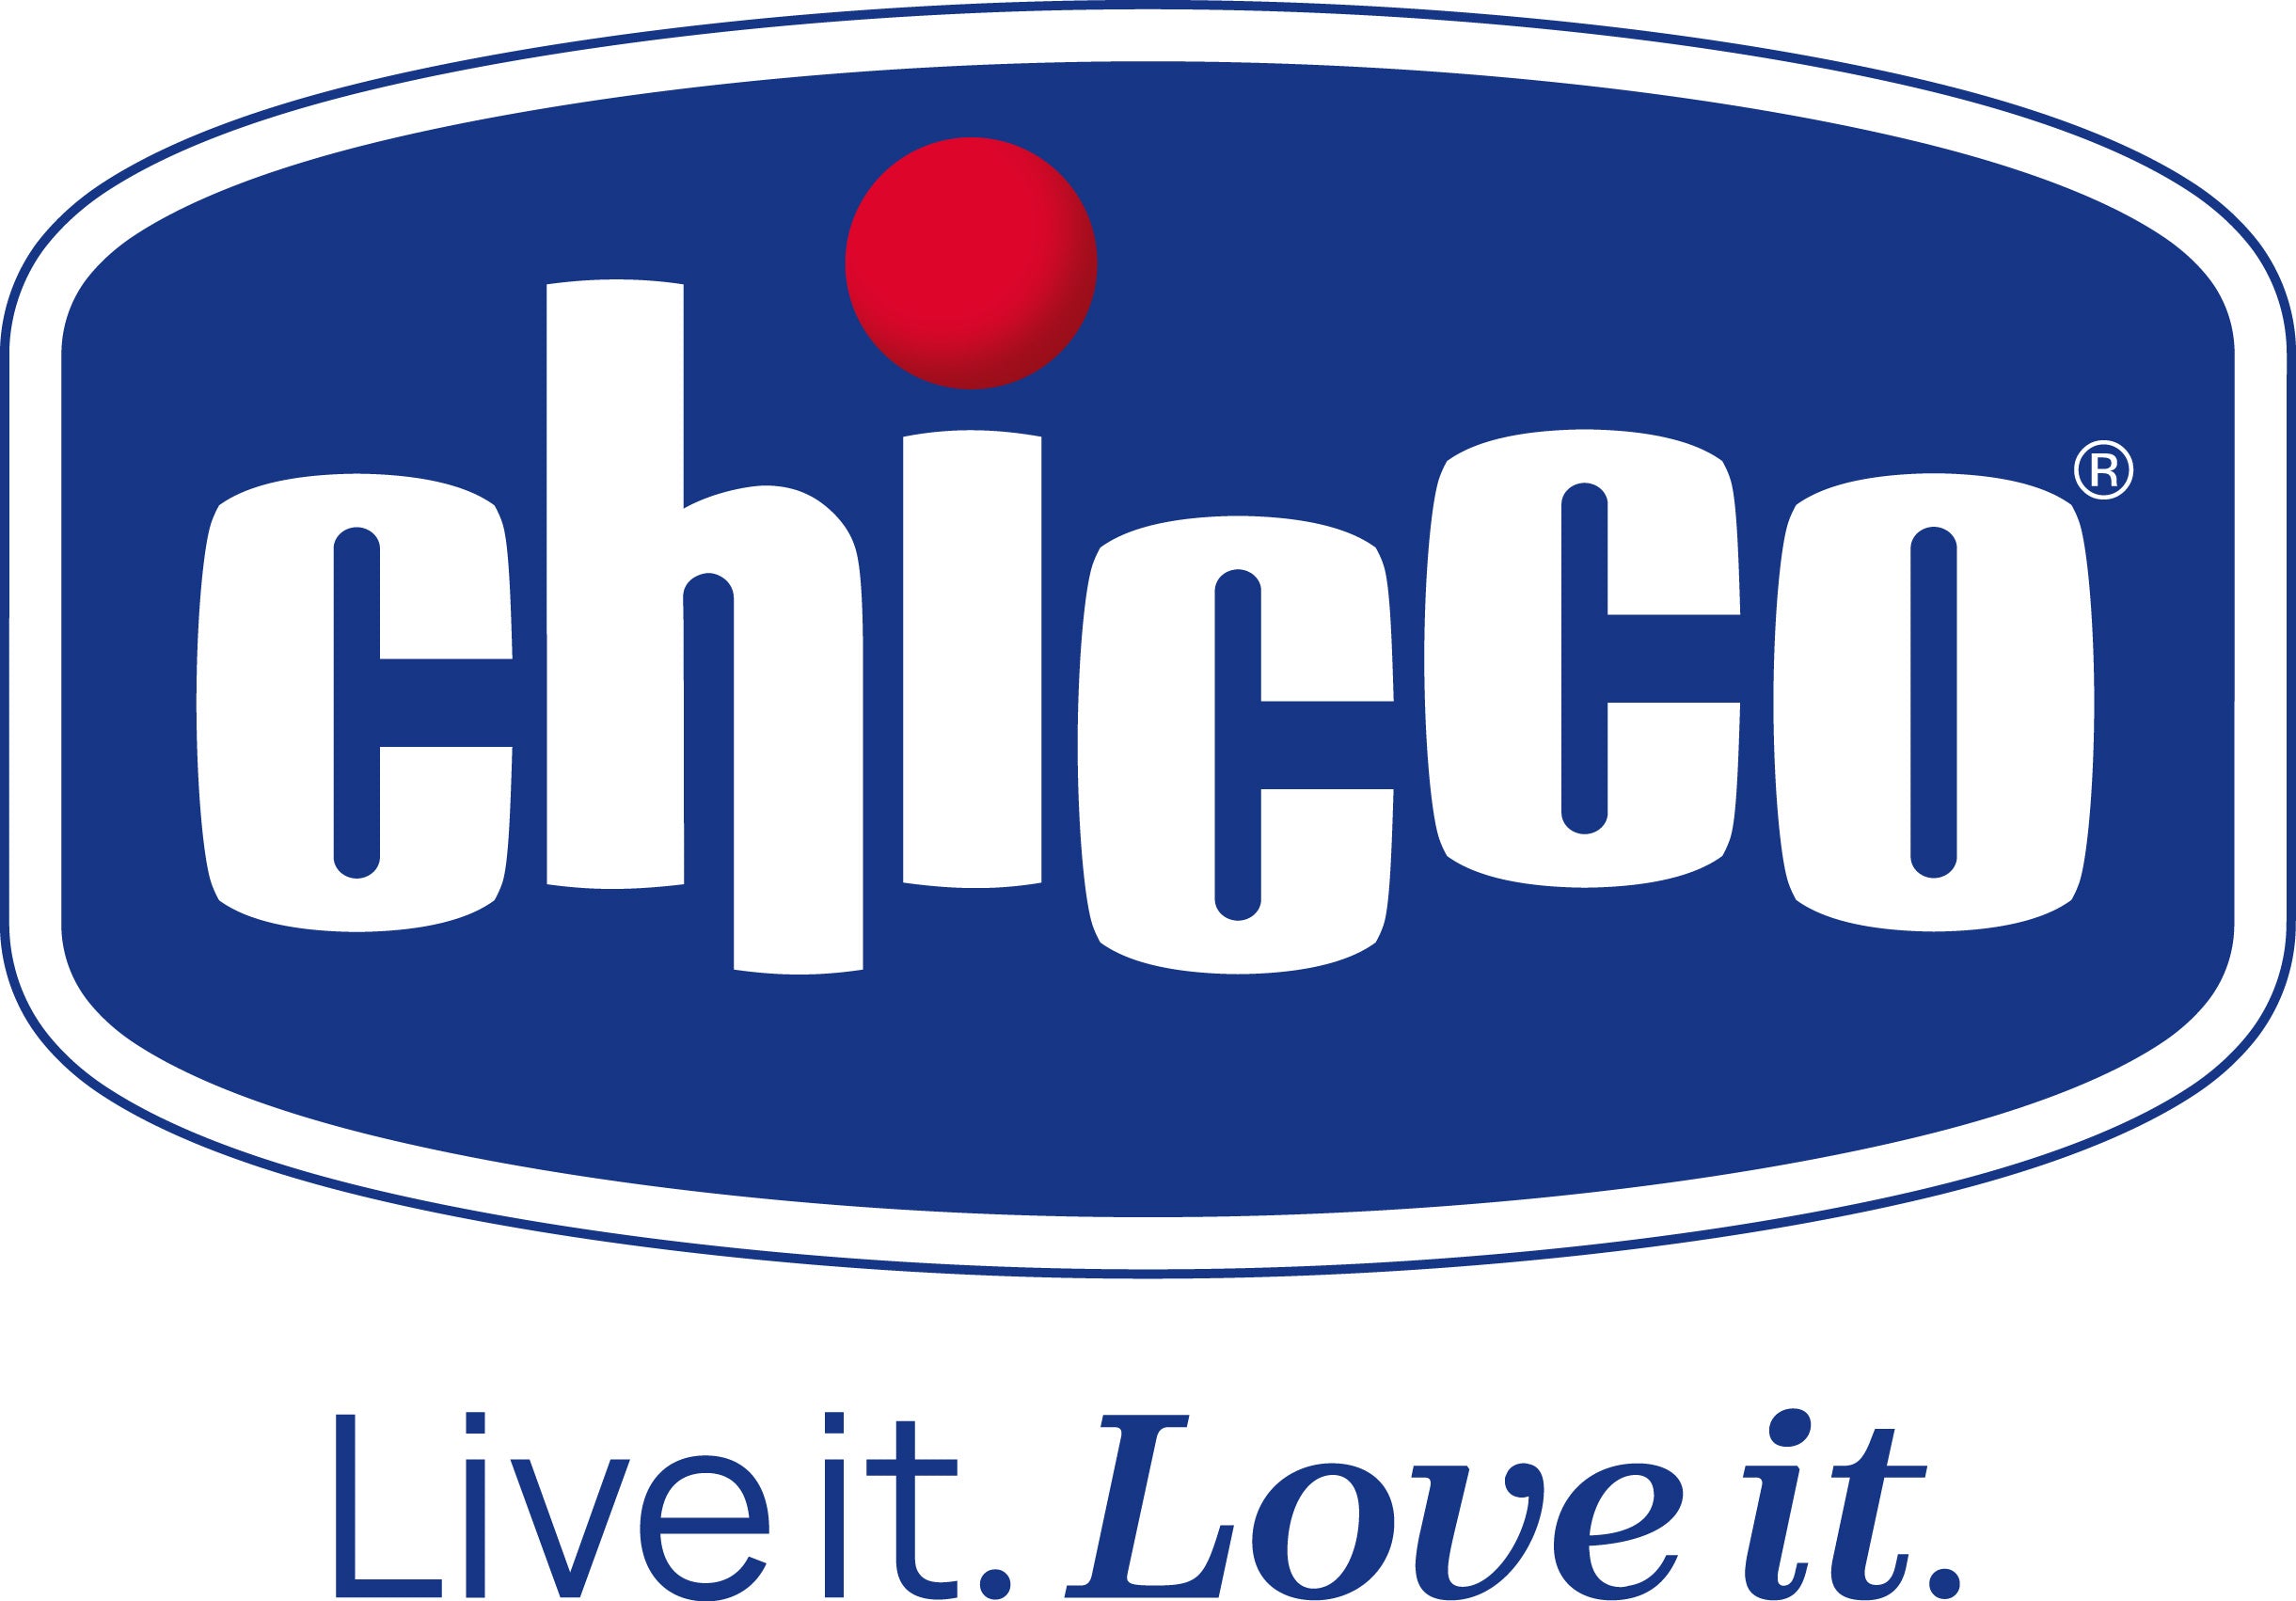 chicco urban travel system colour pack